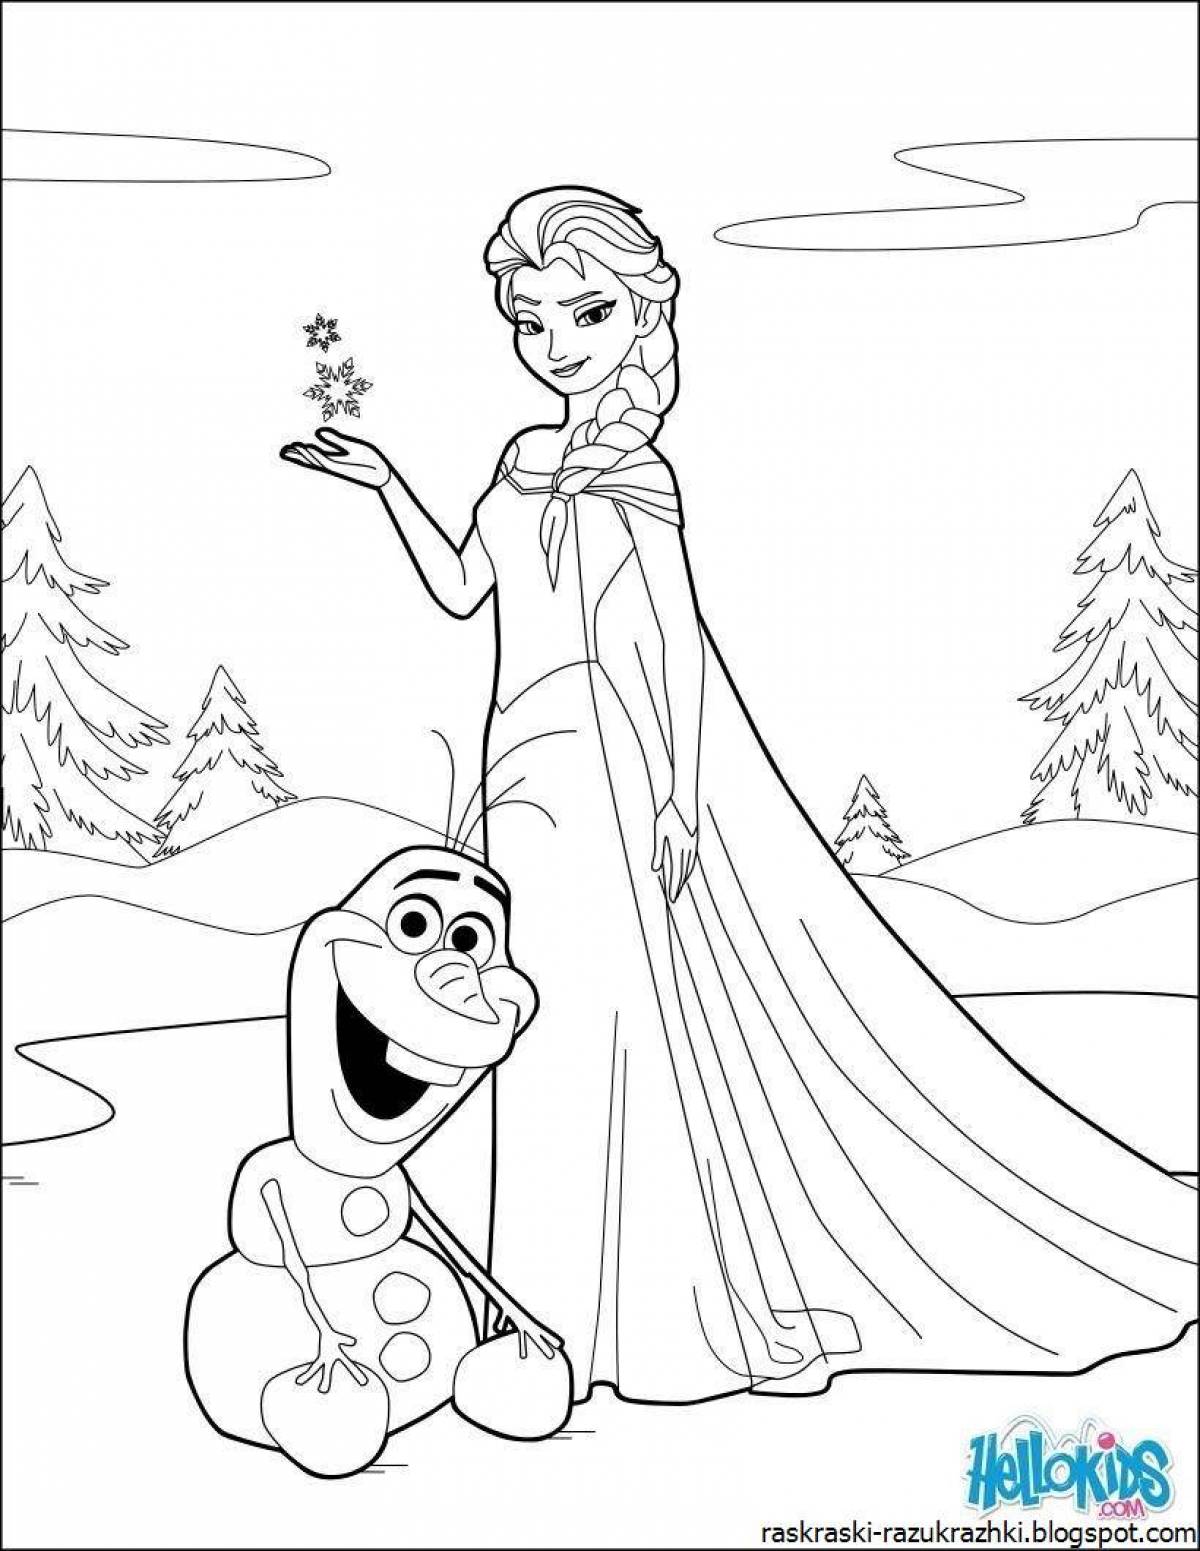 Whimsical Frozen coloring book for kids